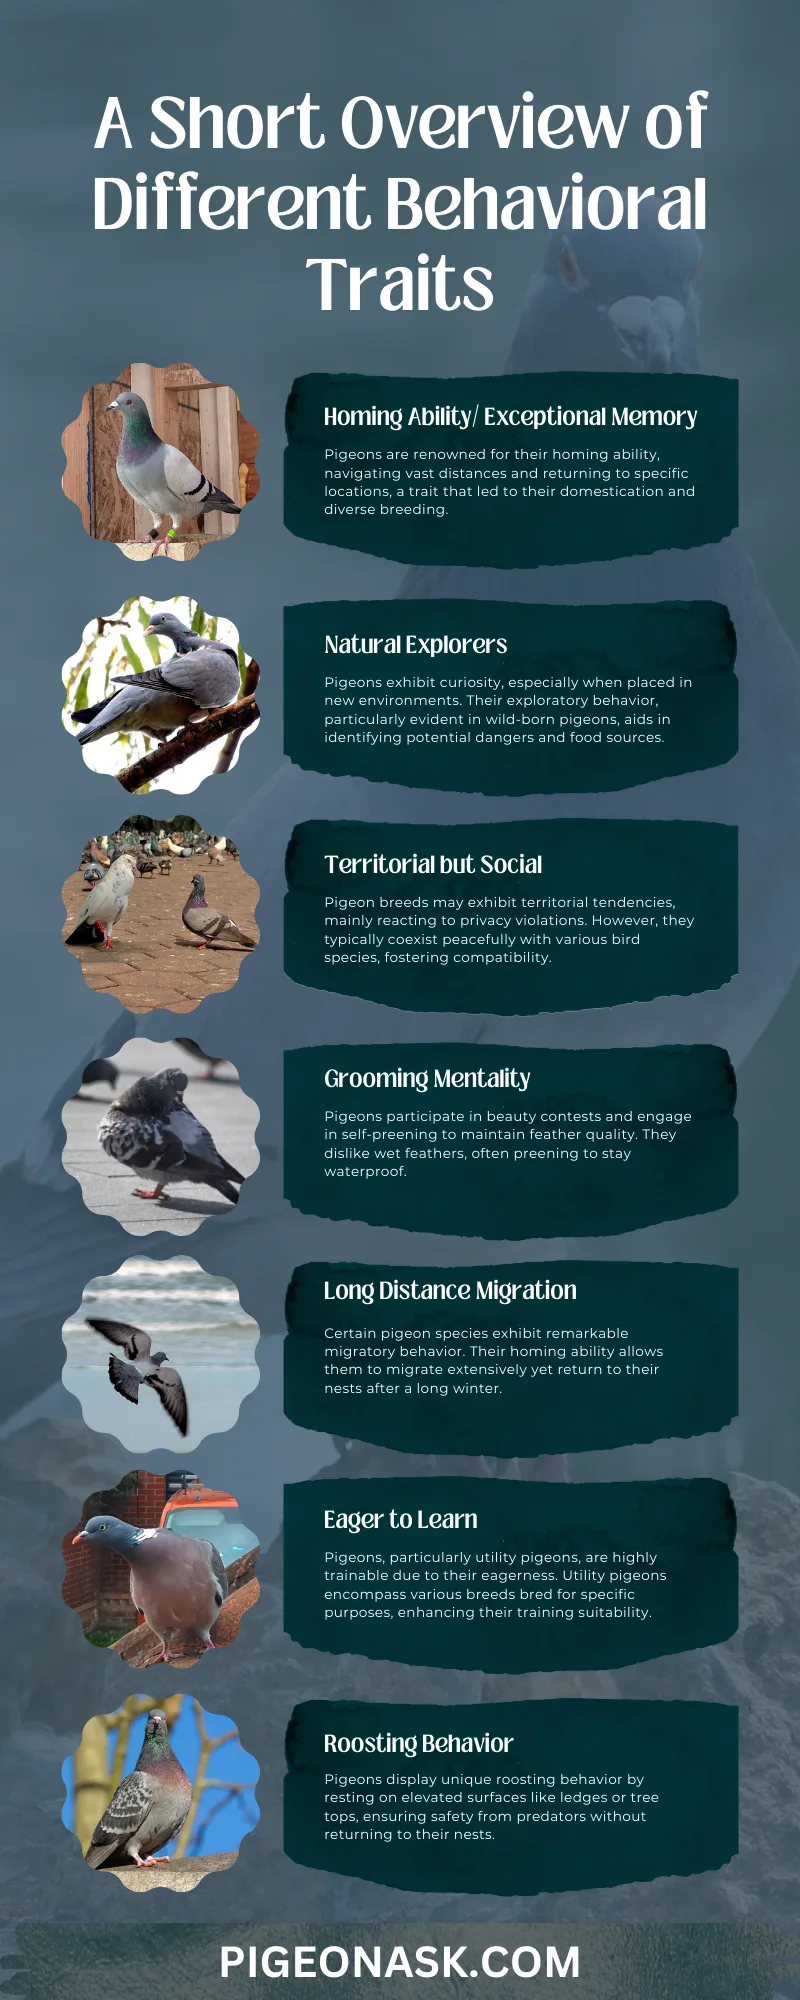 A Short Overview of Different Behavioral Traits